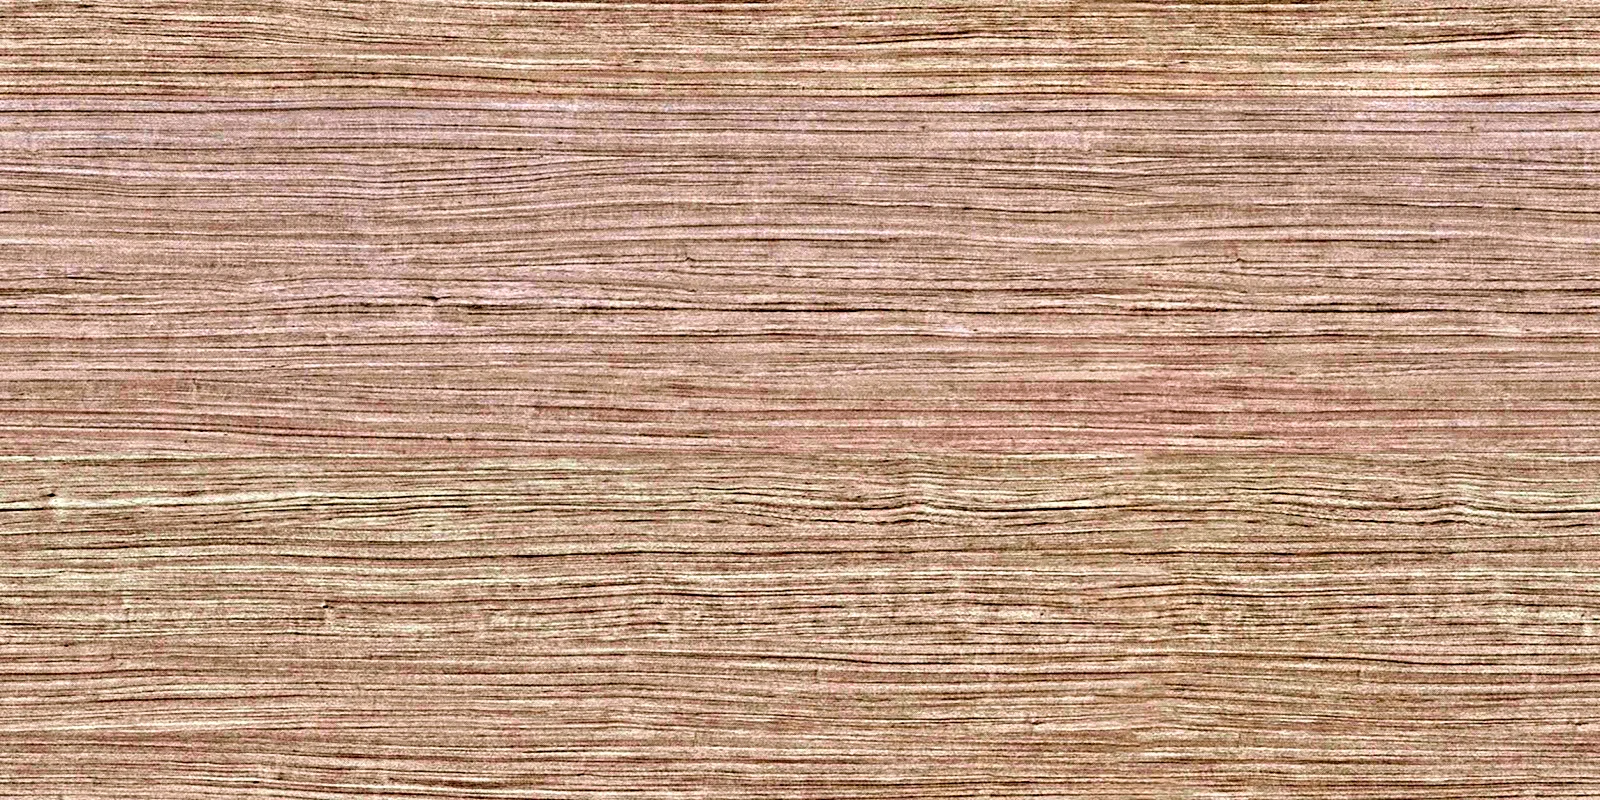 Wood texture 3ds Max